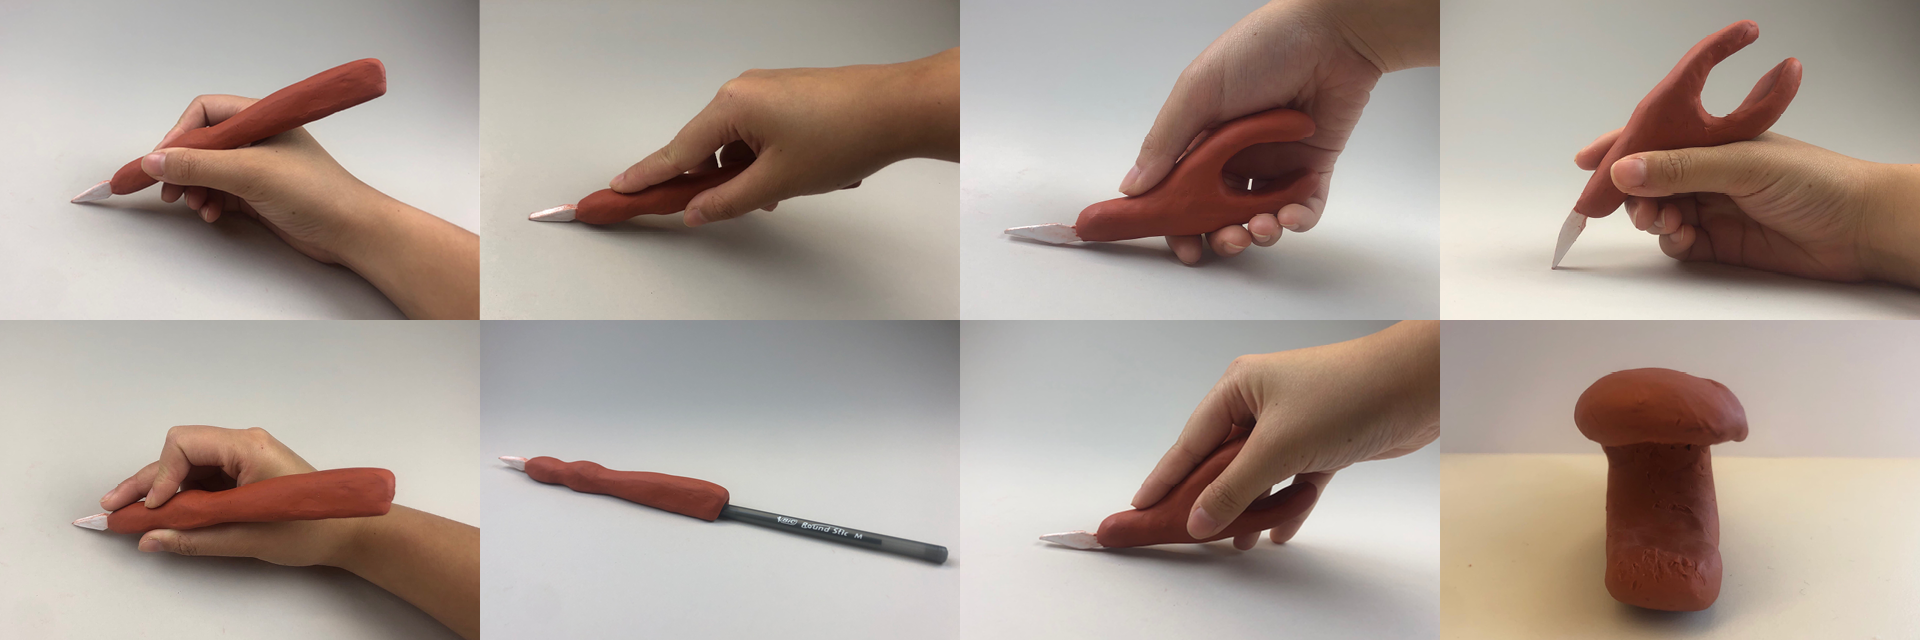 The picture shows a grid of different hand positions on clay models for an exacto knife